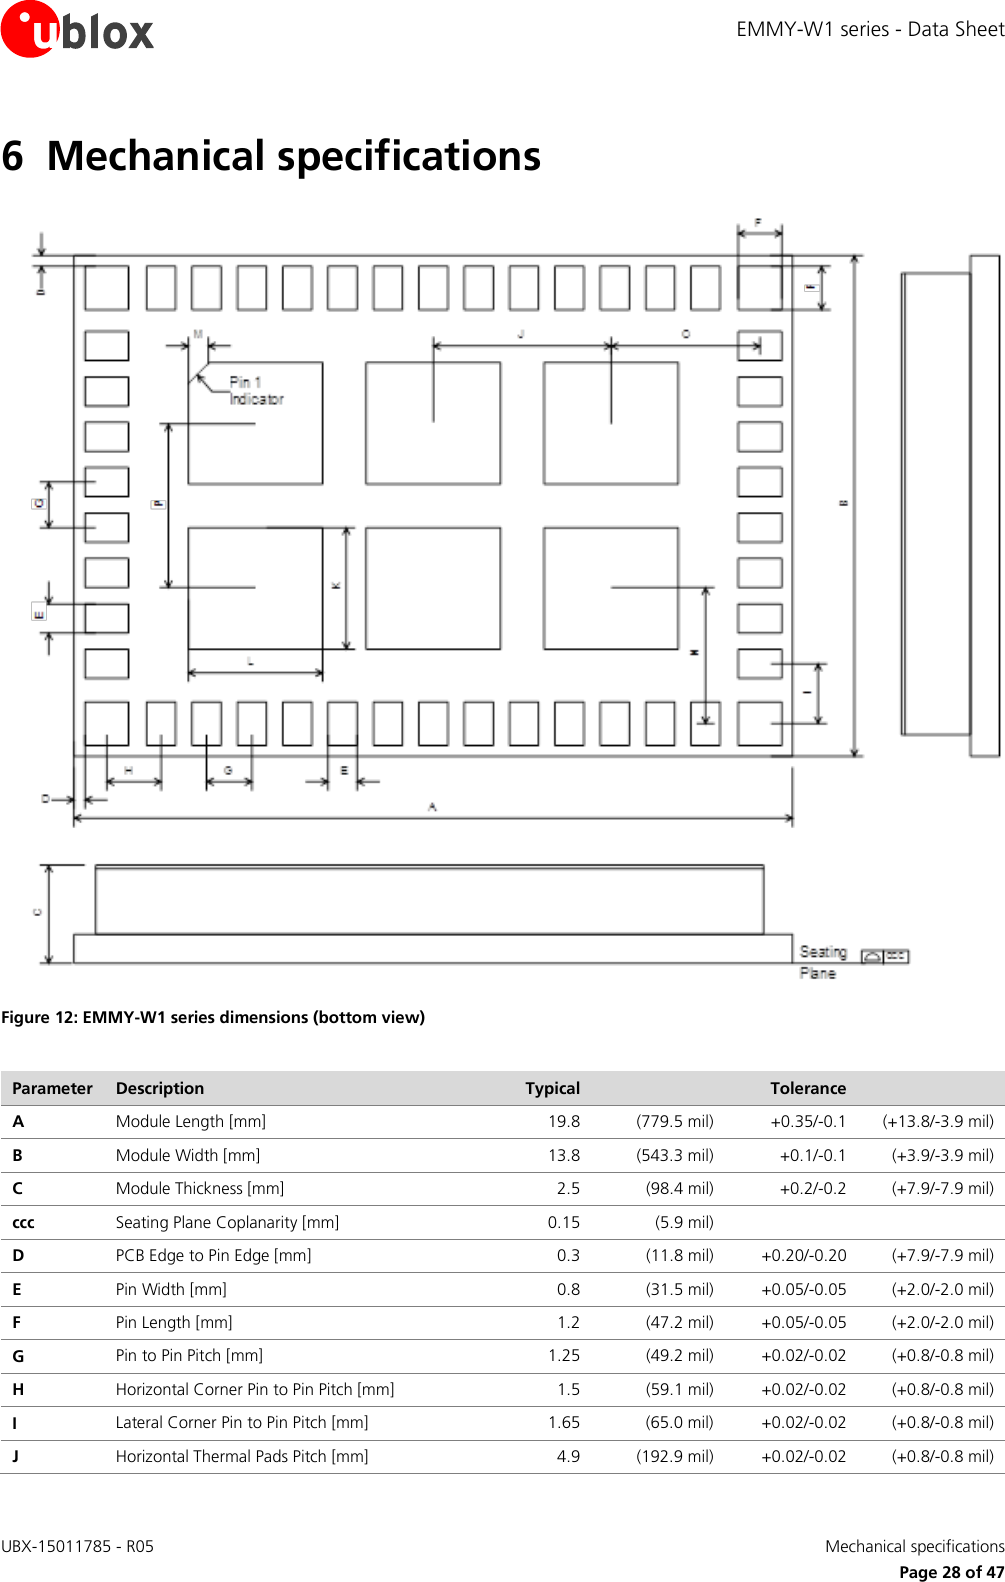 EMMY-W1 series - Data Sheet UBX-15011785 - R05   Mechanical specifications     Page 28 of 47 6 Mechanical specifications  Figure 12: EMMY-W1 series dimensions (bottom view)  Parameter Description Typical  Tolerance  A  Module Length [mm] 19.8 (779.5 mil) +0.35/-0.1 (+13.8/-3.9 mil) B Module Width [mm] 13.8 (543.3 mil) +0.1/-0.1 (+3.9/-3.9 mil) C Module Thickness [mm] 2.5 (98.4 mil) +0.2/-0.2 (+7.9/-7.9 mil) ccc Seating Plane Coplanarity [mm] 0.15 (5.9 mil)   D PCB Edge to Pin Edge [mm] 0.3 (11.8 mil) +0.20/-0.20 (+7.9/-7.9 mil) E Pin Width [mm]   0.8 (31.5 mil) +0.05/-0.05 (+2.0/-2.0 mil) F Pin Length [mm] 1.2 (47.2 mil) +0.05/-0.05 (+2.0/-2.0 mil) G Pin to Pin Pitch [mm] 1.25 (49.2 mil) +0.02/-0.02 (+0.8/-0.8 mil) H Horizontal Corner Pin to Pin Pitch [mm] 1.5 (59.1 mil) +0.02/-0.02 (+0.8/-0.8 mil) I Lateral Corner Pin to Pin Pitch [mm] 1.65 (65.0 mil)  +0.02/-0.02 (+0.8/-0.8 mil) J Horizontal Thermal Pads Pitch [mm] 4.9 (192.9 mil) +0.02/-0.02 (+0.8/-0.8 mil) 